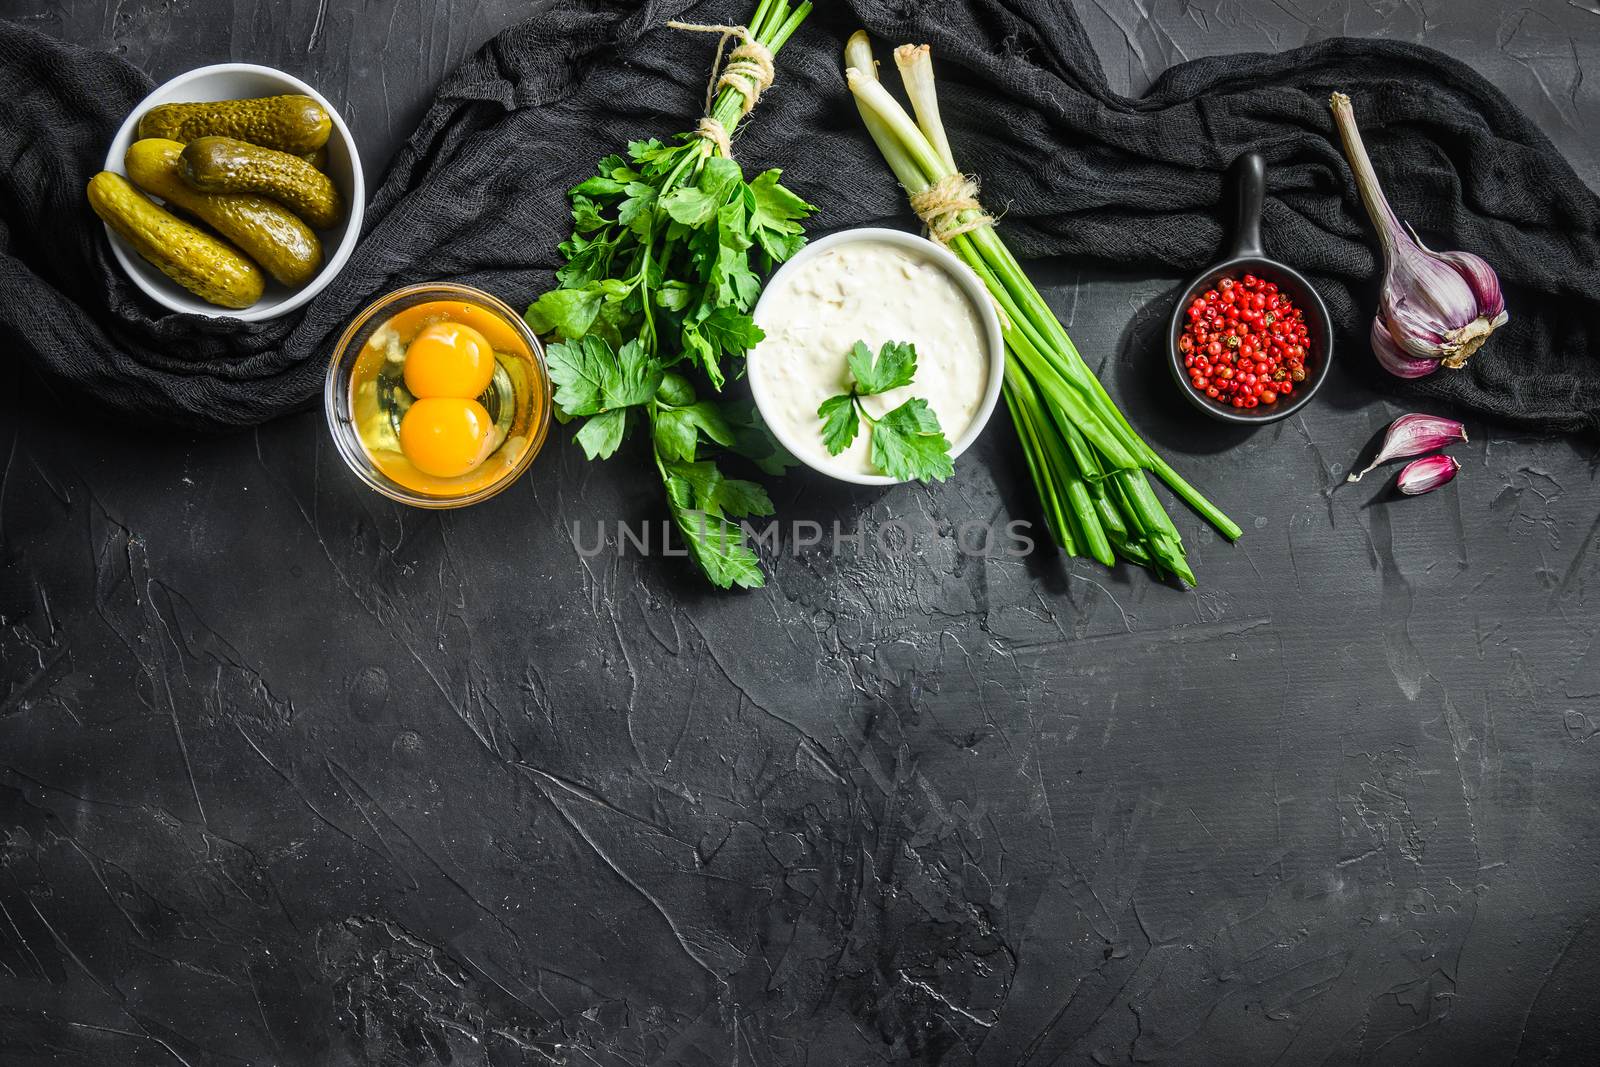 Ranch sauce organic bio tartare in a white porcelain bowl with vegetables, herbs and spices on old textured black stone table top view horisontal concept space for text in bottom by Ilianesolenyi